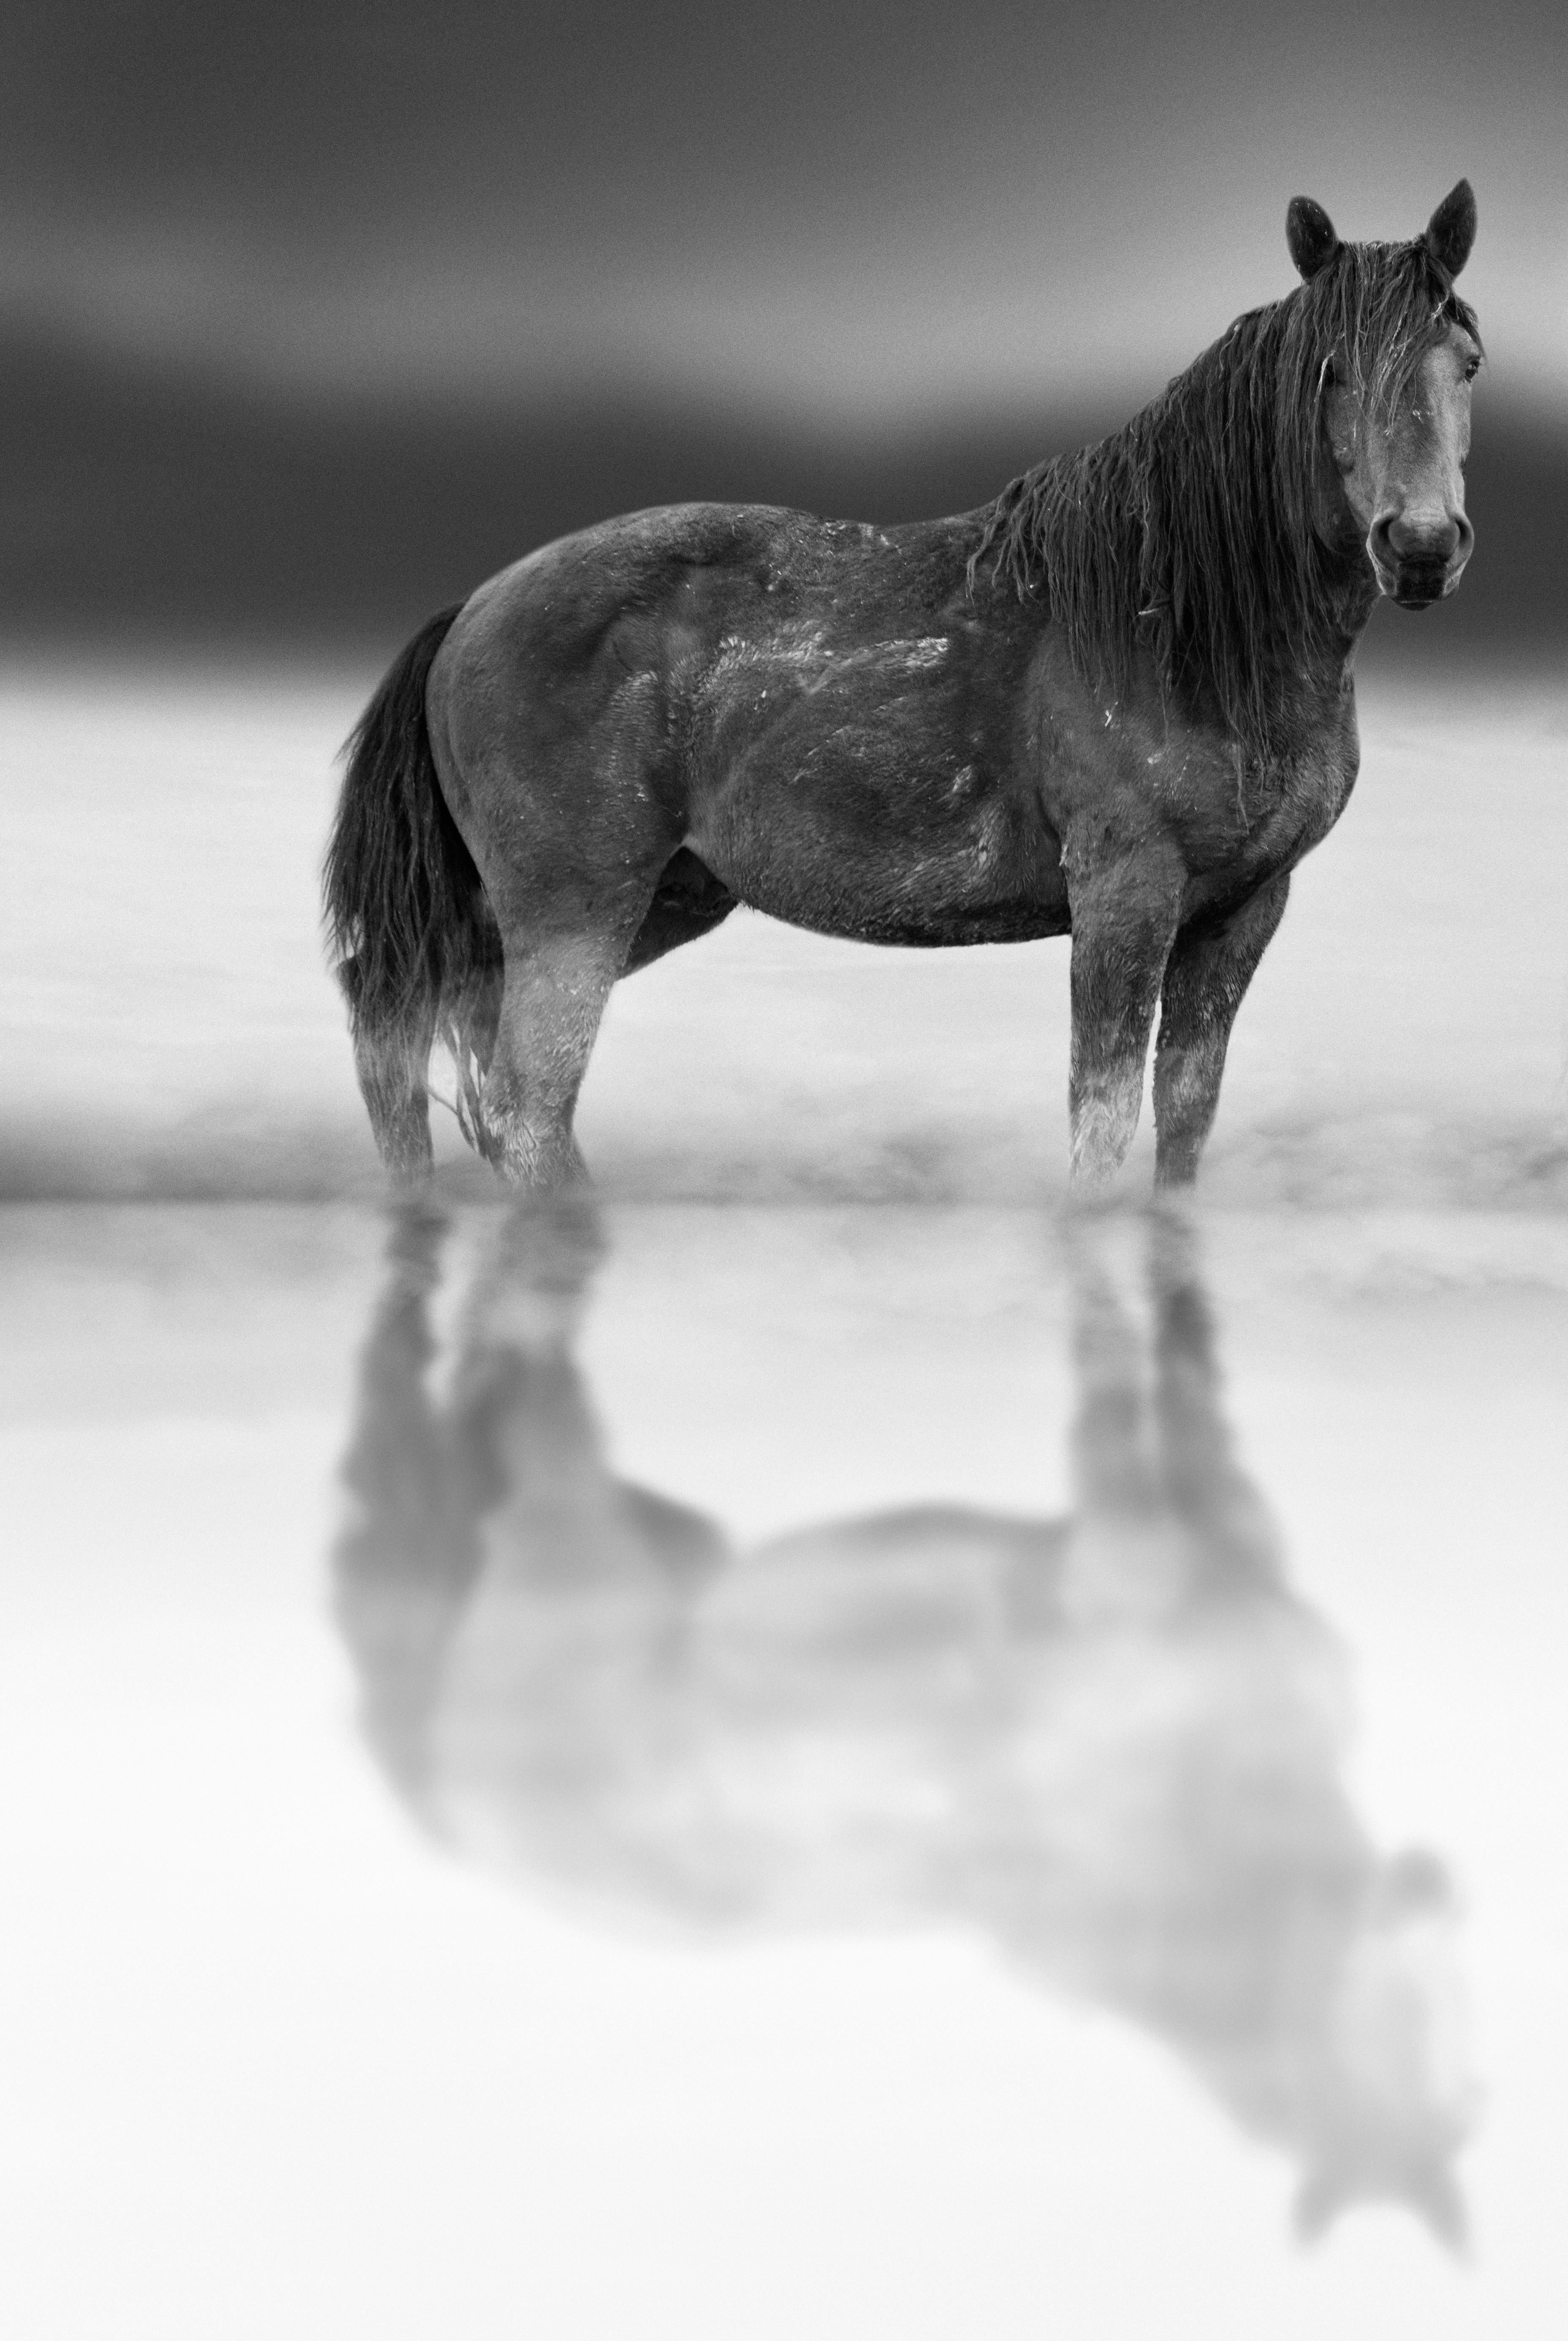 This is a contemporary black and white photograph of a American Wild Mustang. 
"They represent the ultimate expression of American freedom"
36 x 48  (Only 3 unsigned prints were printed)
Printed using only archival paper and ink.
Unsigned test